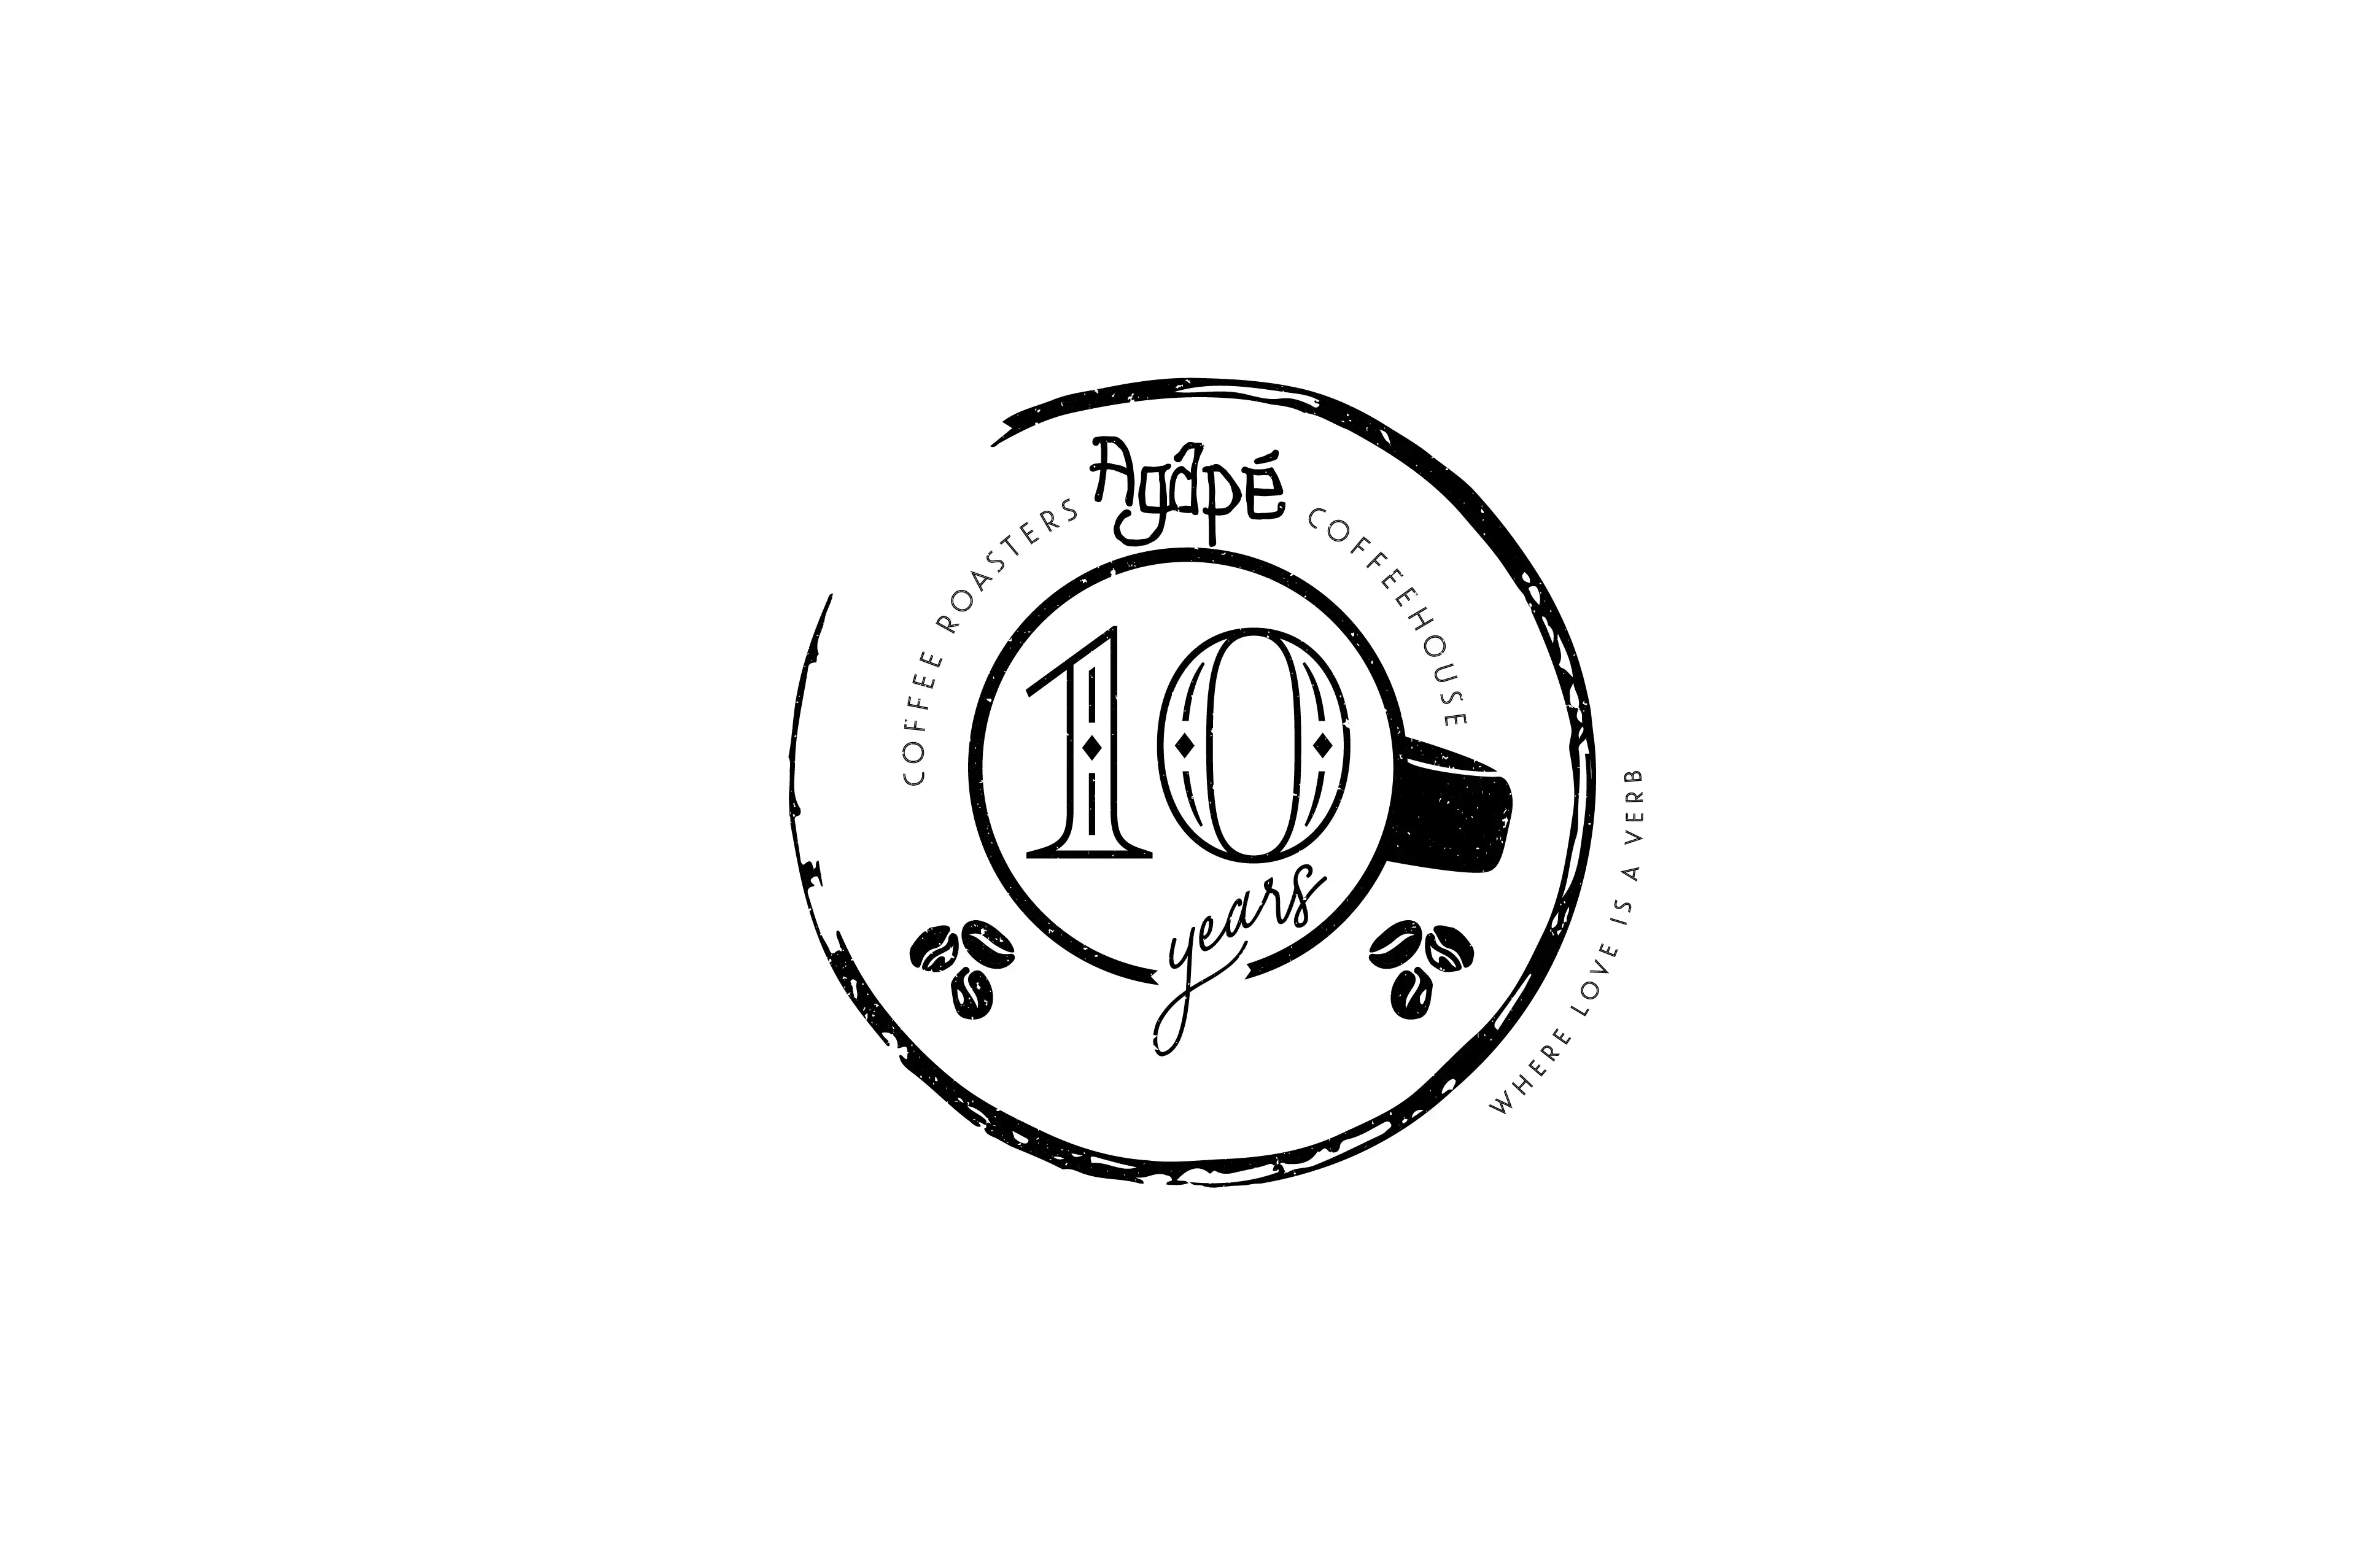 celebrating our 10 year anniversary serving payette, idaho